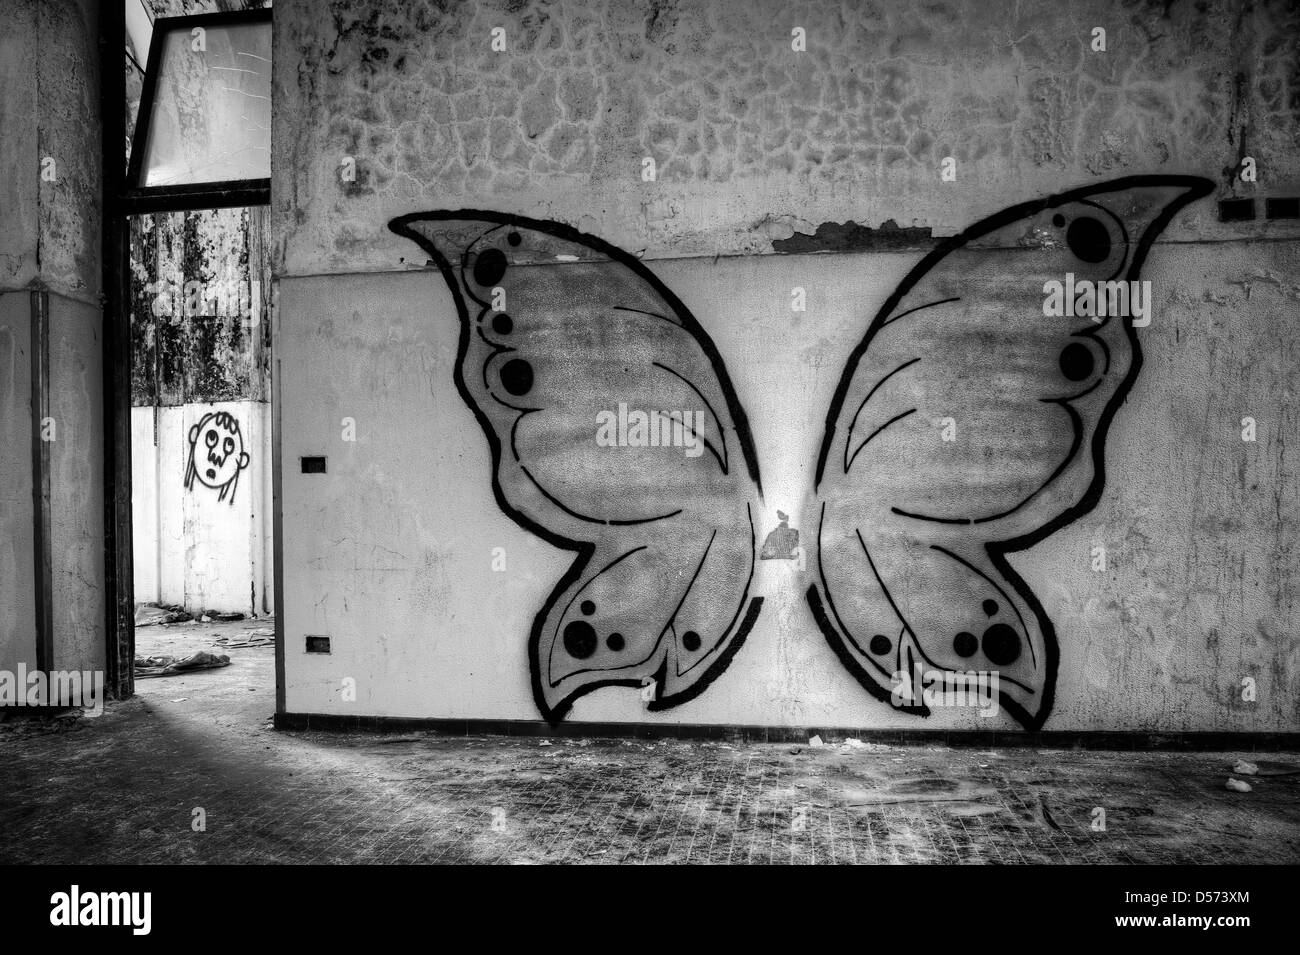 Italy. Abandoned mental hospital. Butterfly mural Stock Photo